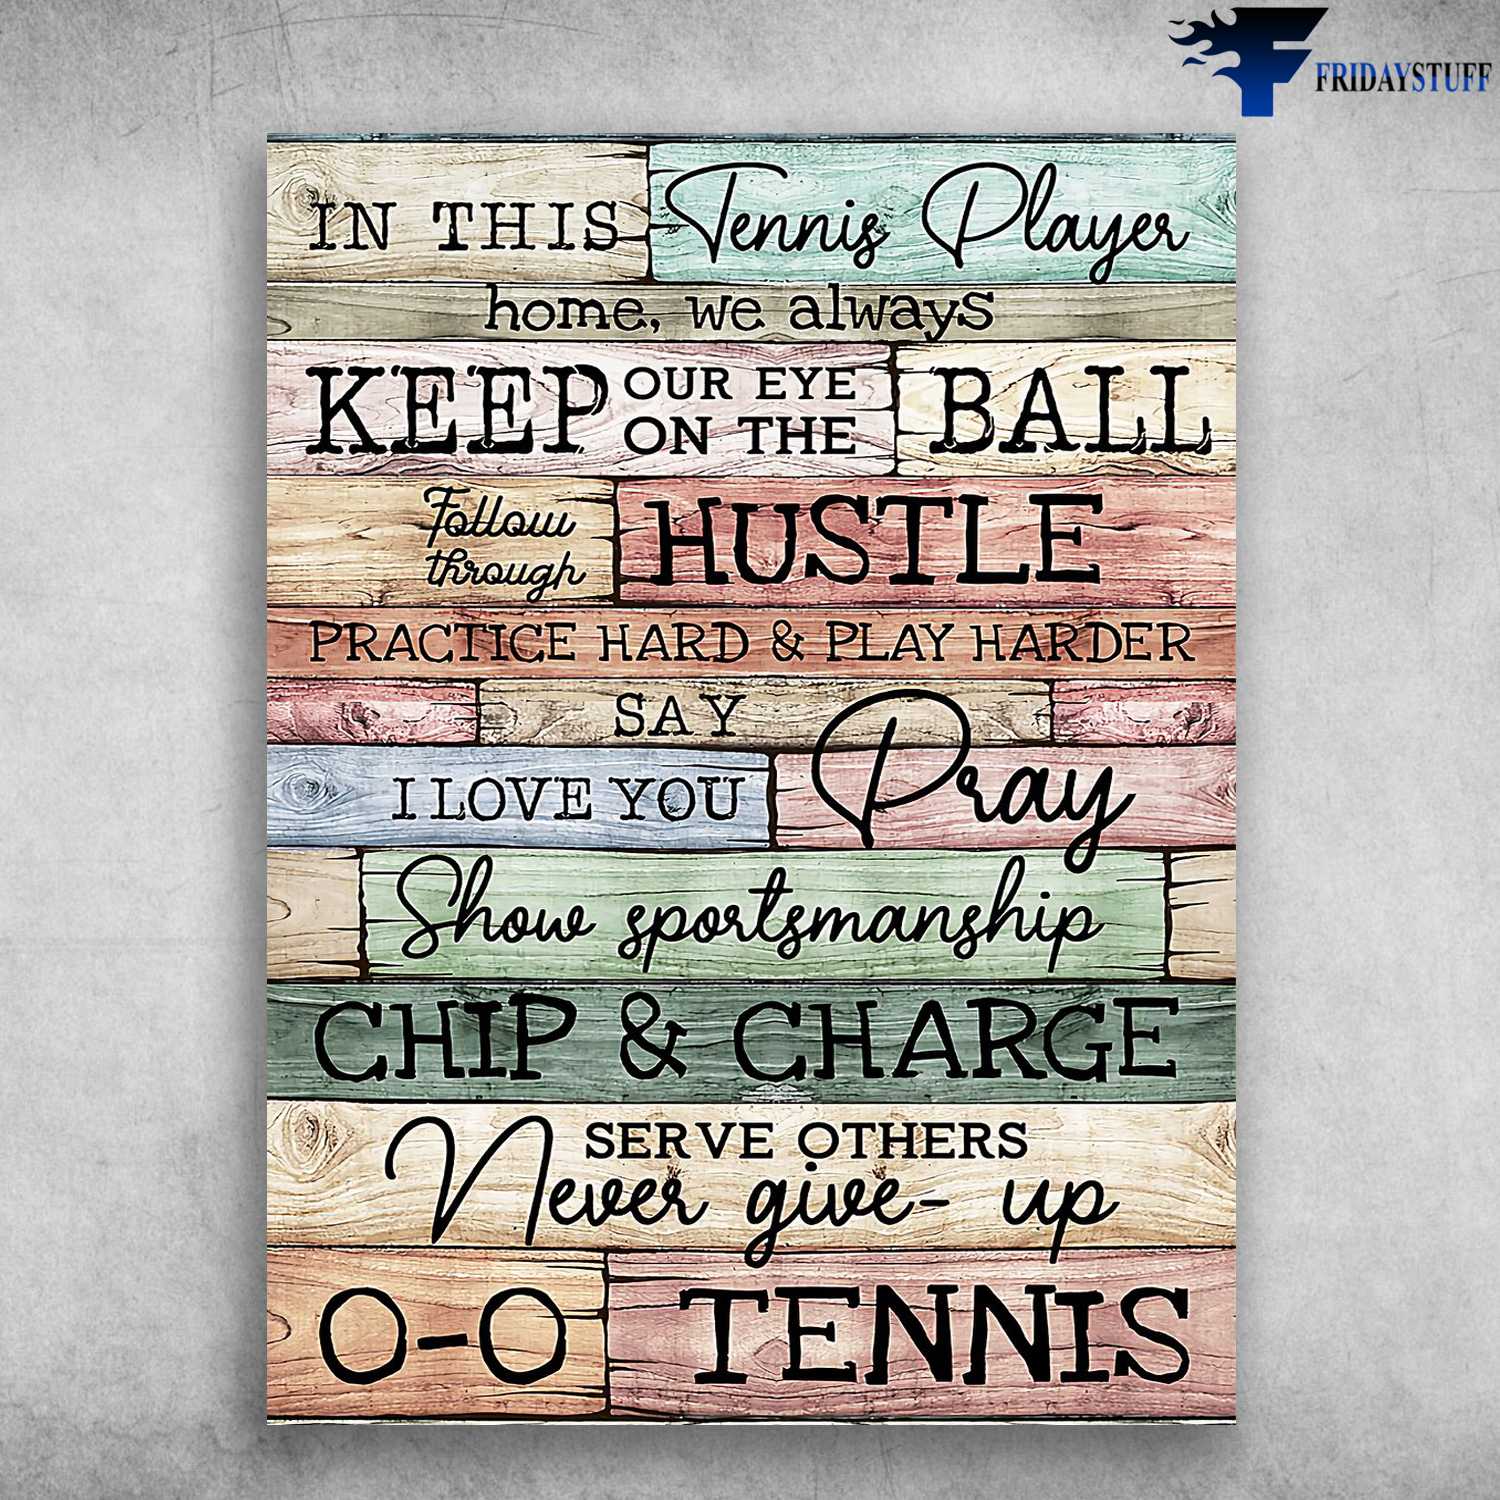 Tennis Lover, Tenis Poster - In This Tennis Player Home, We Always Keep Your Eye, On The Ball, Follow Through Hustle, Practic Hard And Play Harder